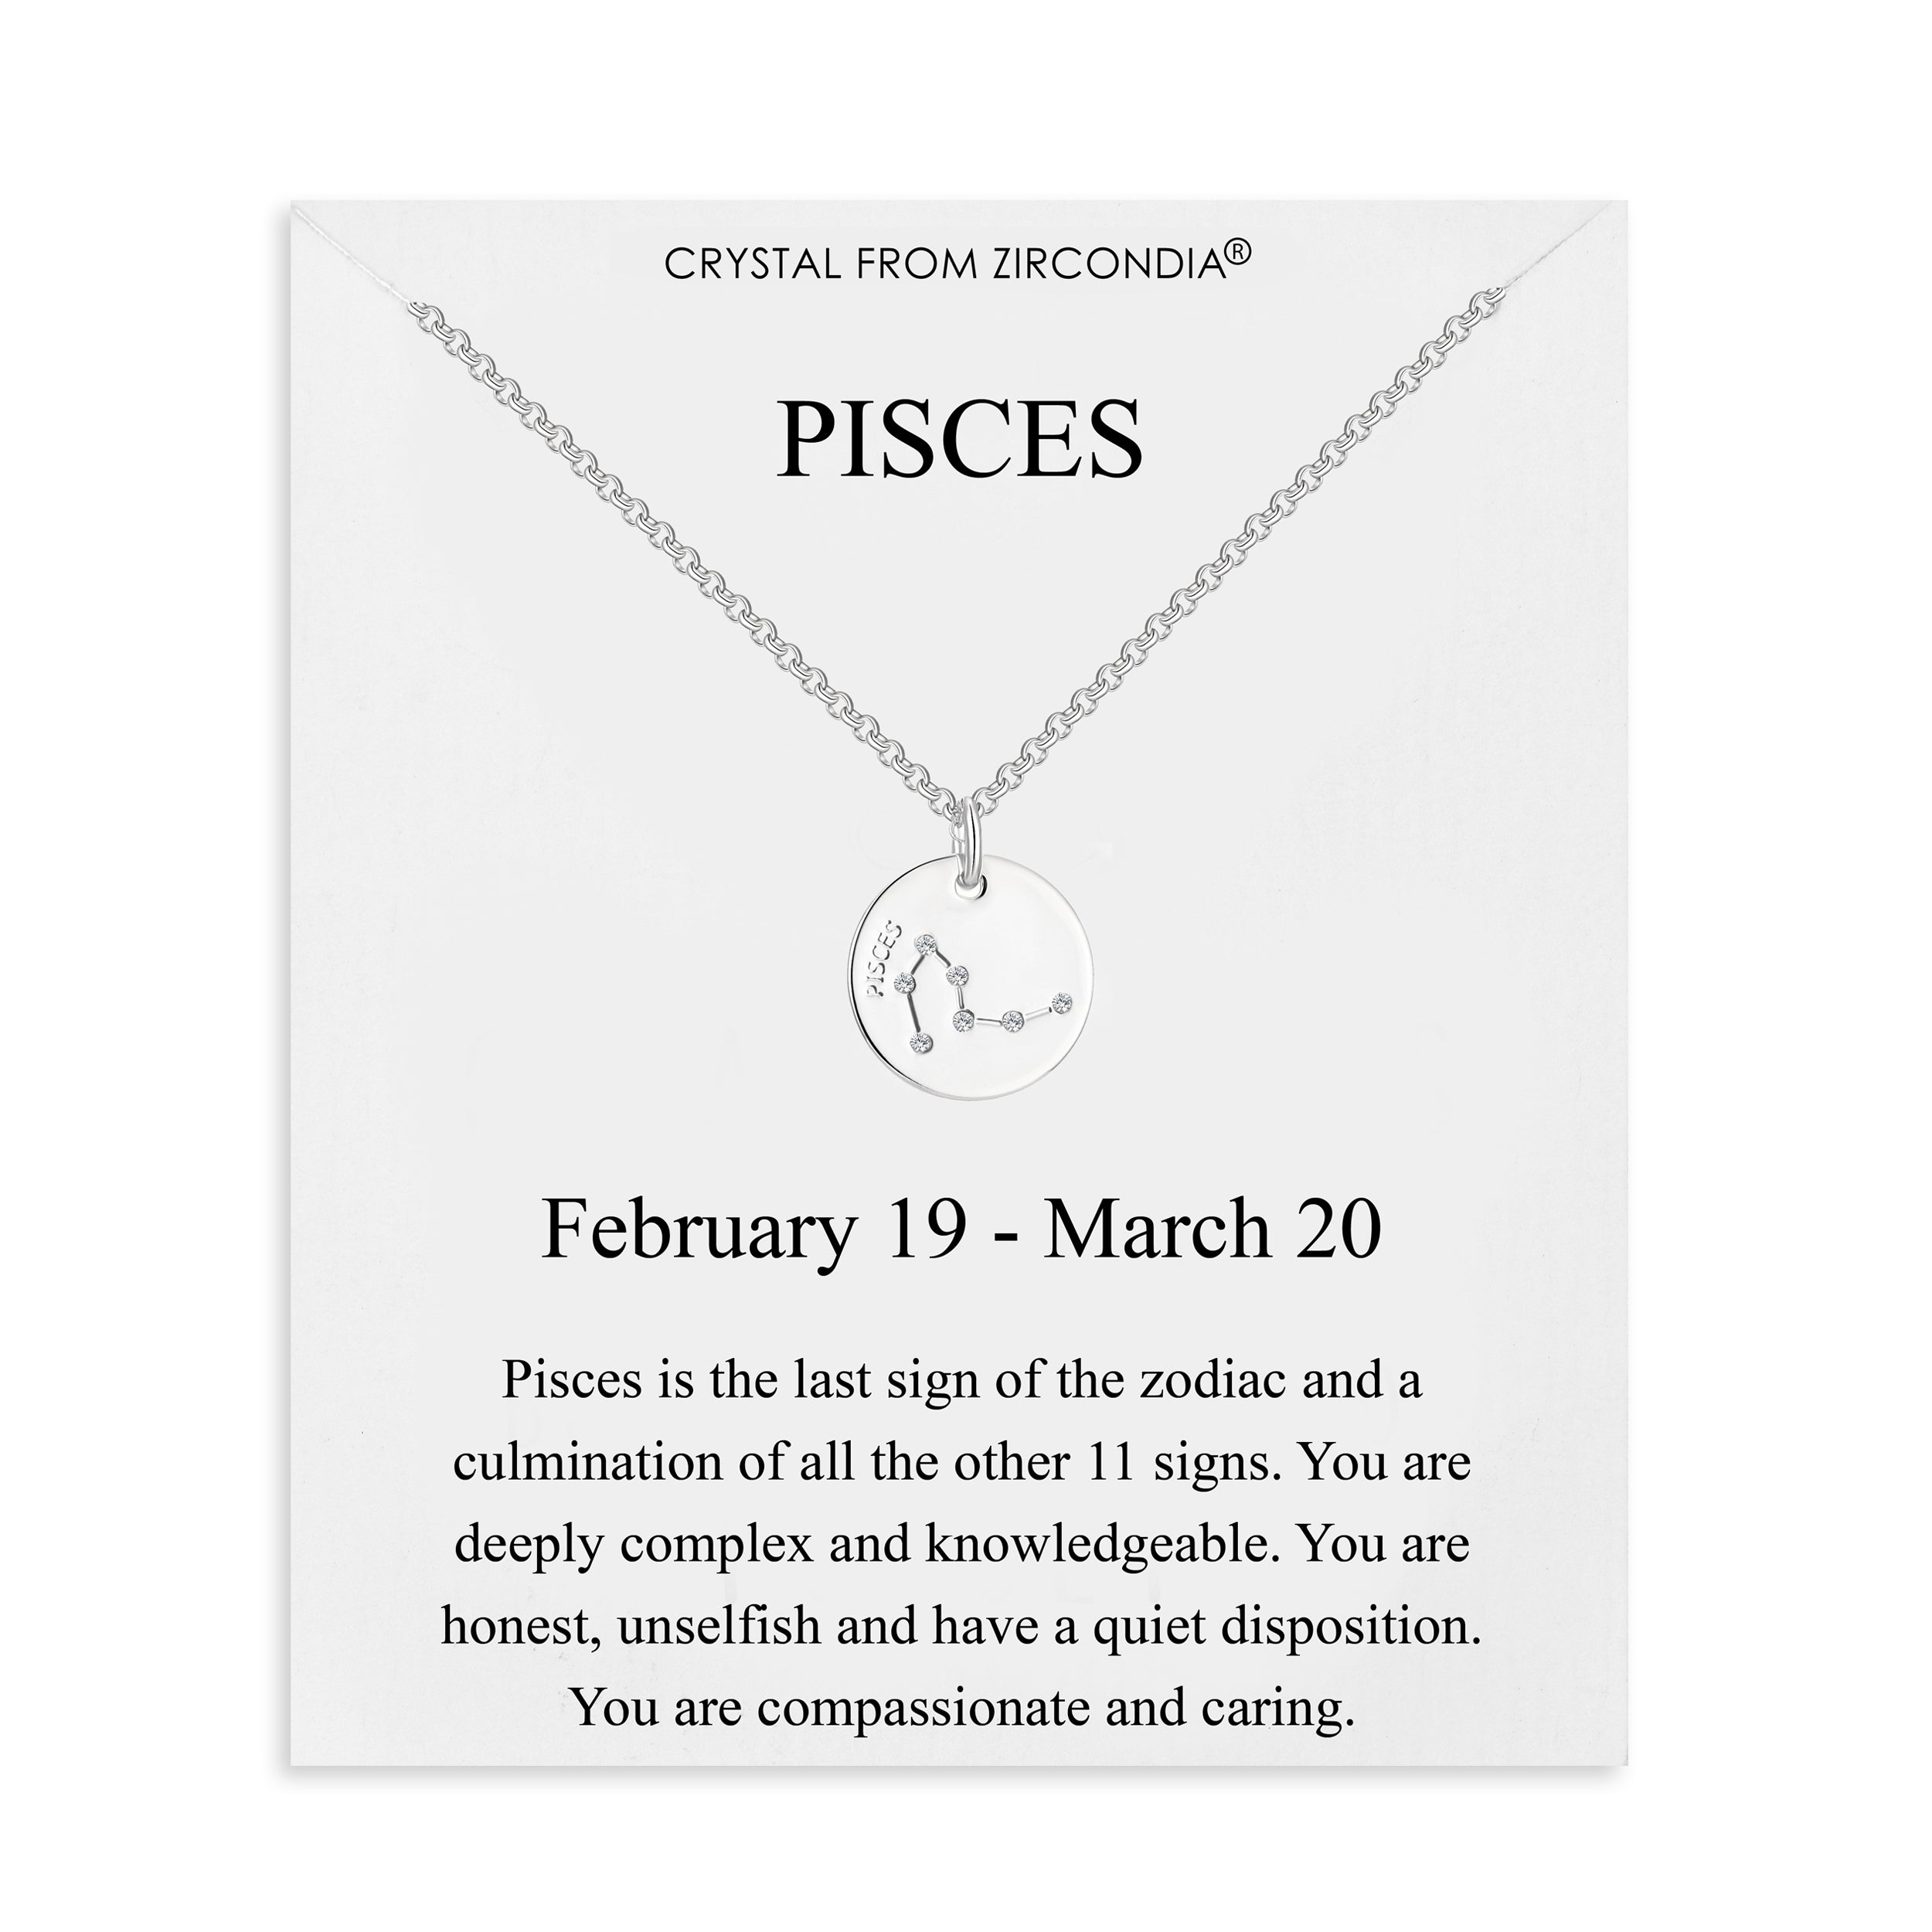 Pisces Zodiac Star Sign Disc Necklace Created with Zircondia® Crystals by Philip Jones Jewellery